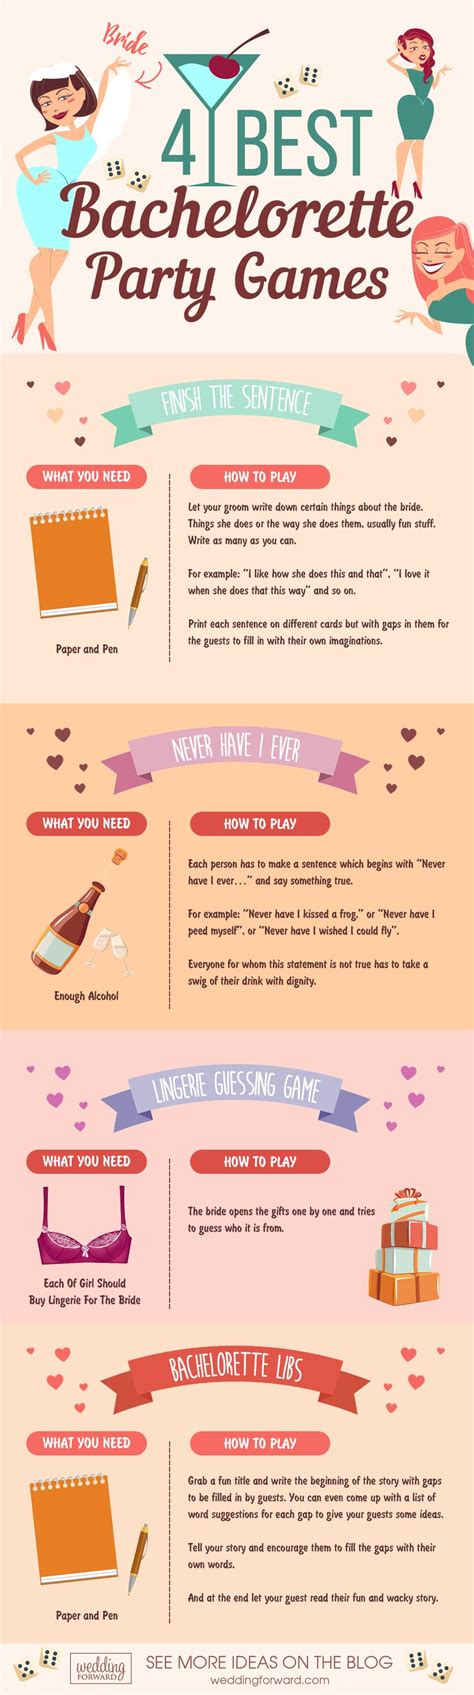 20 most popular bachelorette party games in 2018